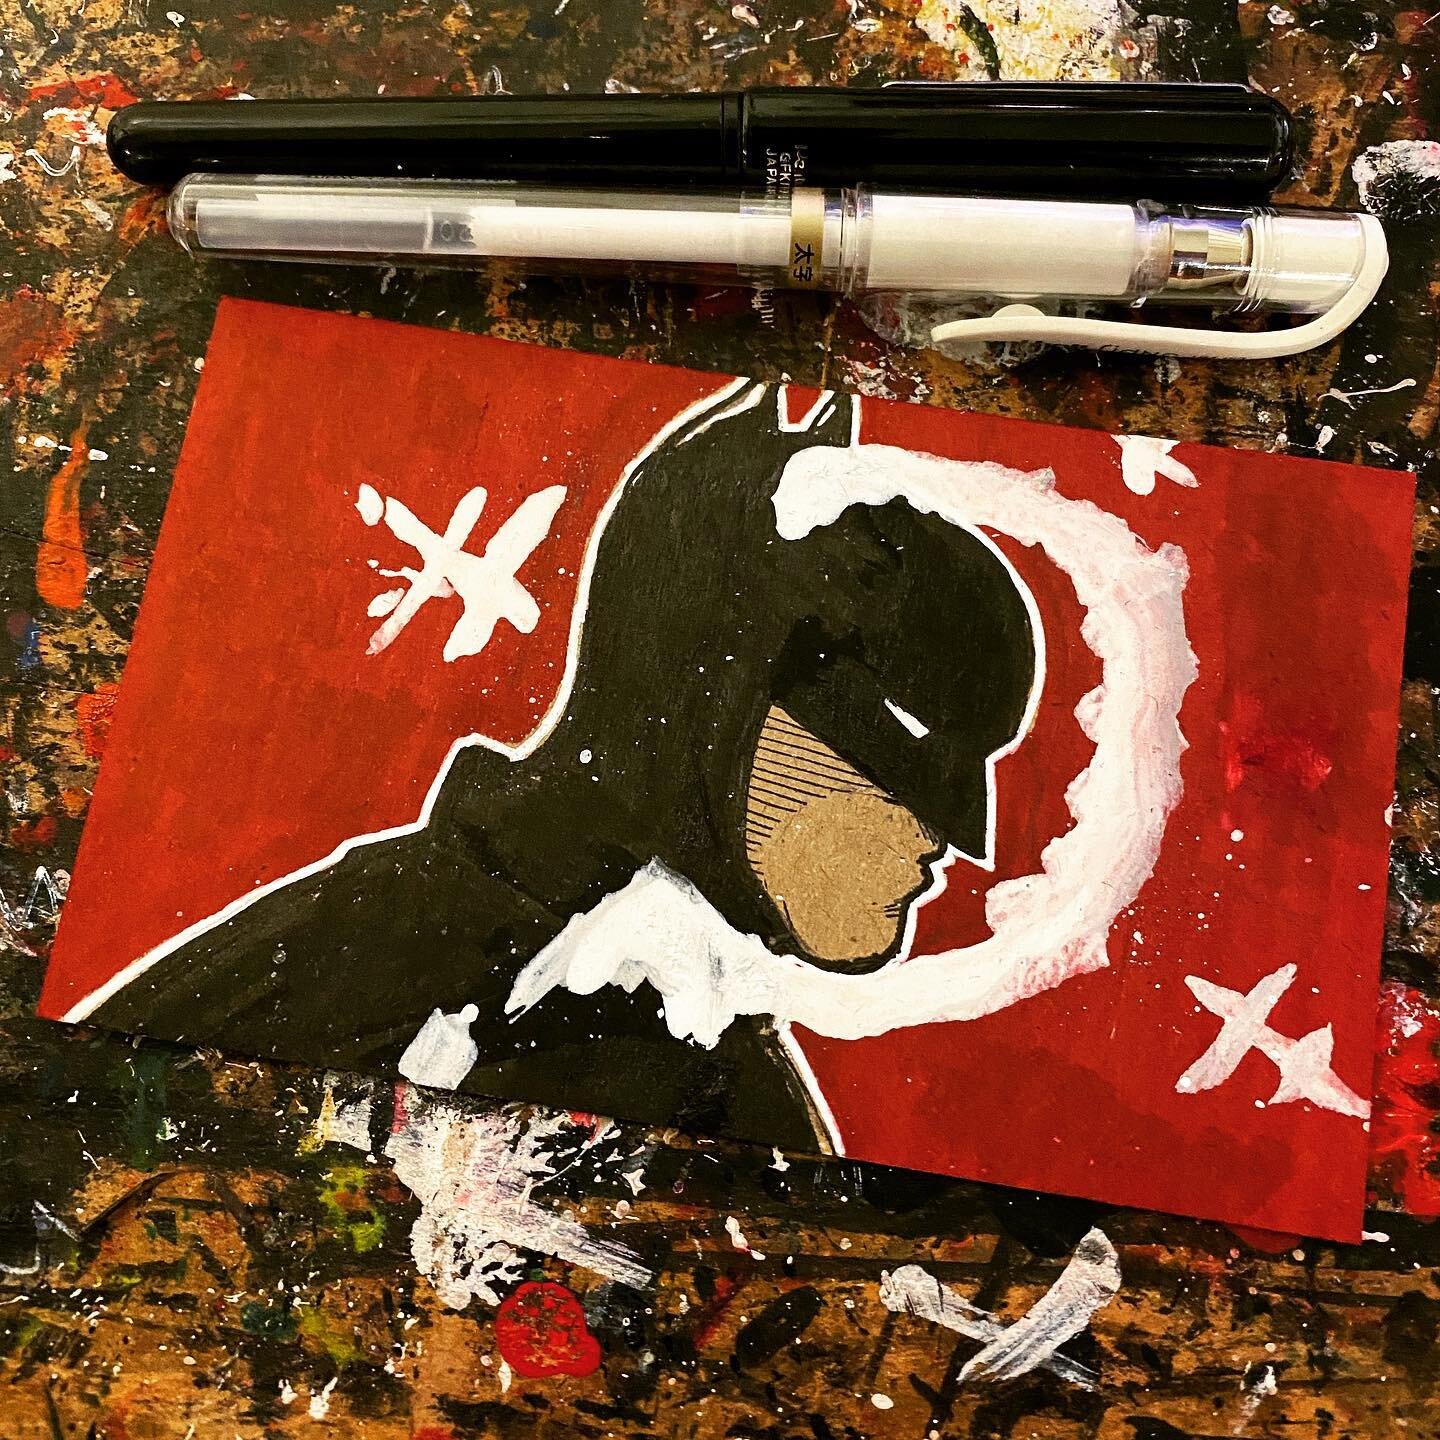 &ldquo;What&rsquo;s black and blue and dead all over?&rdquo; #TheBatman #cardBOREDsketch #ink #brush #pen